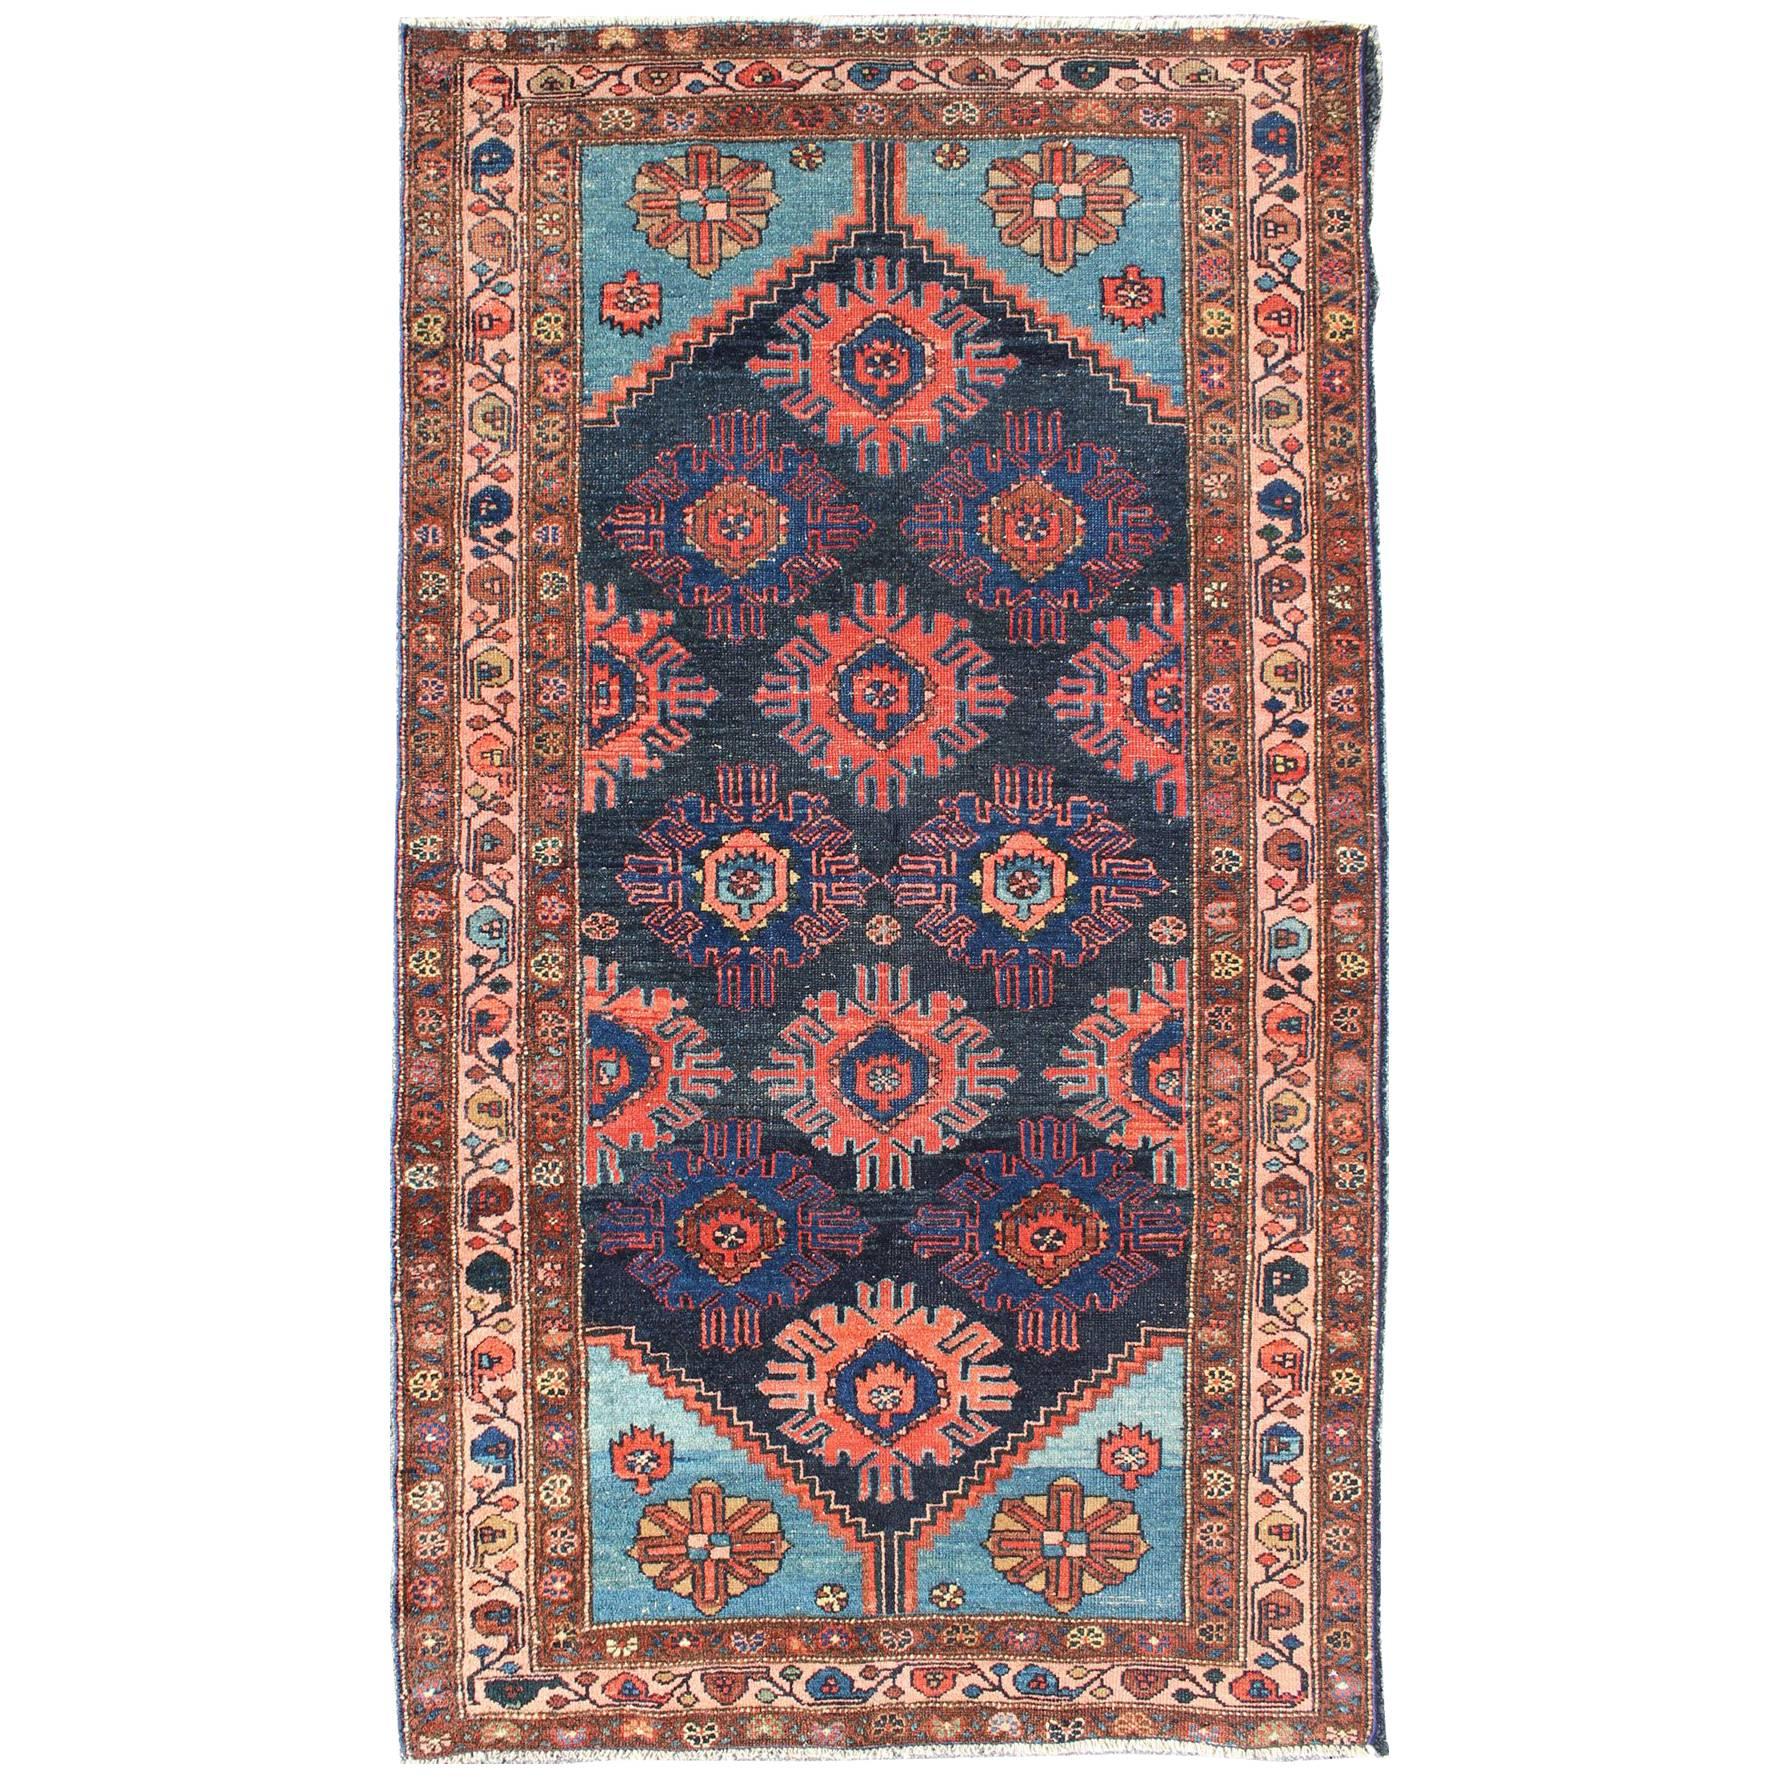 Antique Persian Malayer Carpet with Sub-Geometric Floral Design